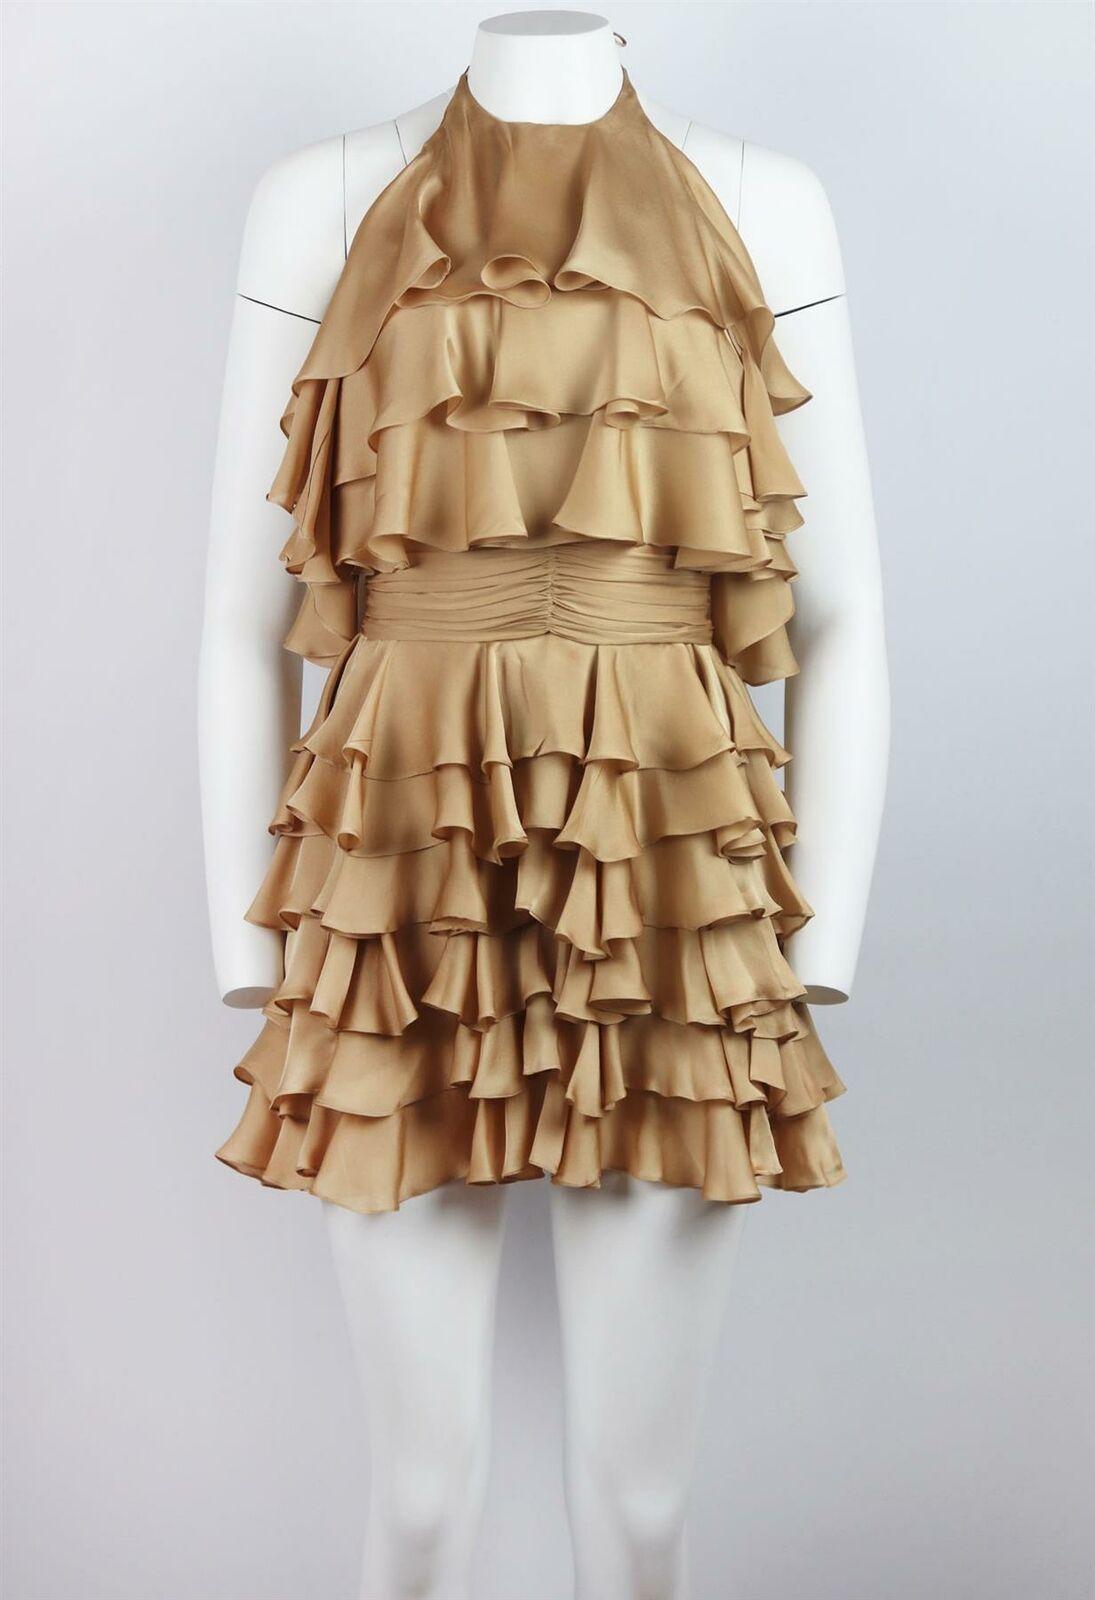 Balmain's mini dress is designed with tiers of flouncy ruffles that move beautifully as you walk, it's cut with a cinched in waist from smooth silk-charmeuse and has halterneck silhouette.
Beige silk.
Concealed zip fastening at back.
100% Silk;